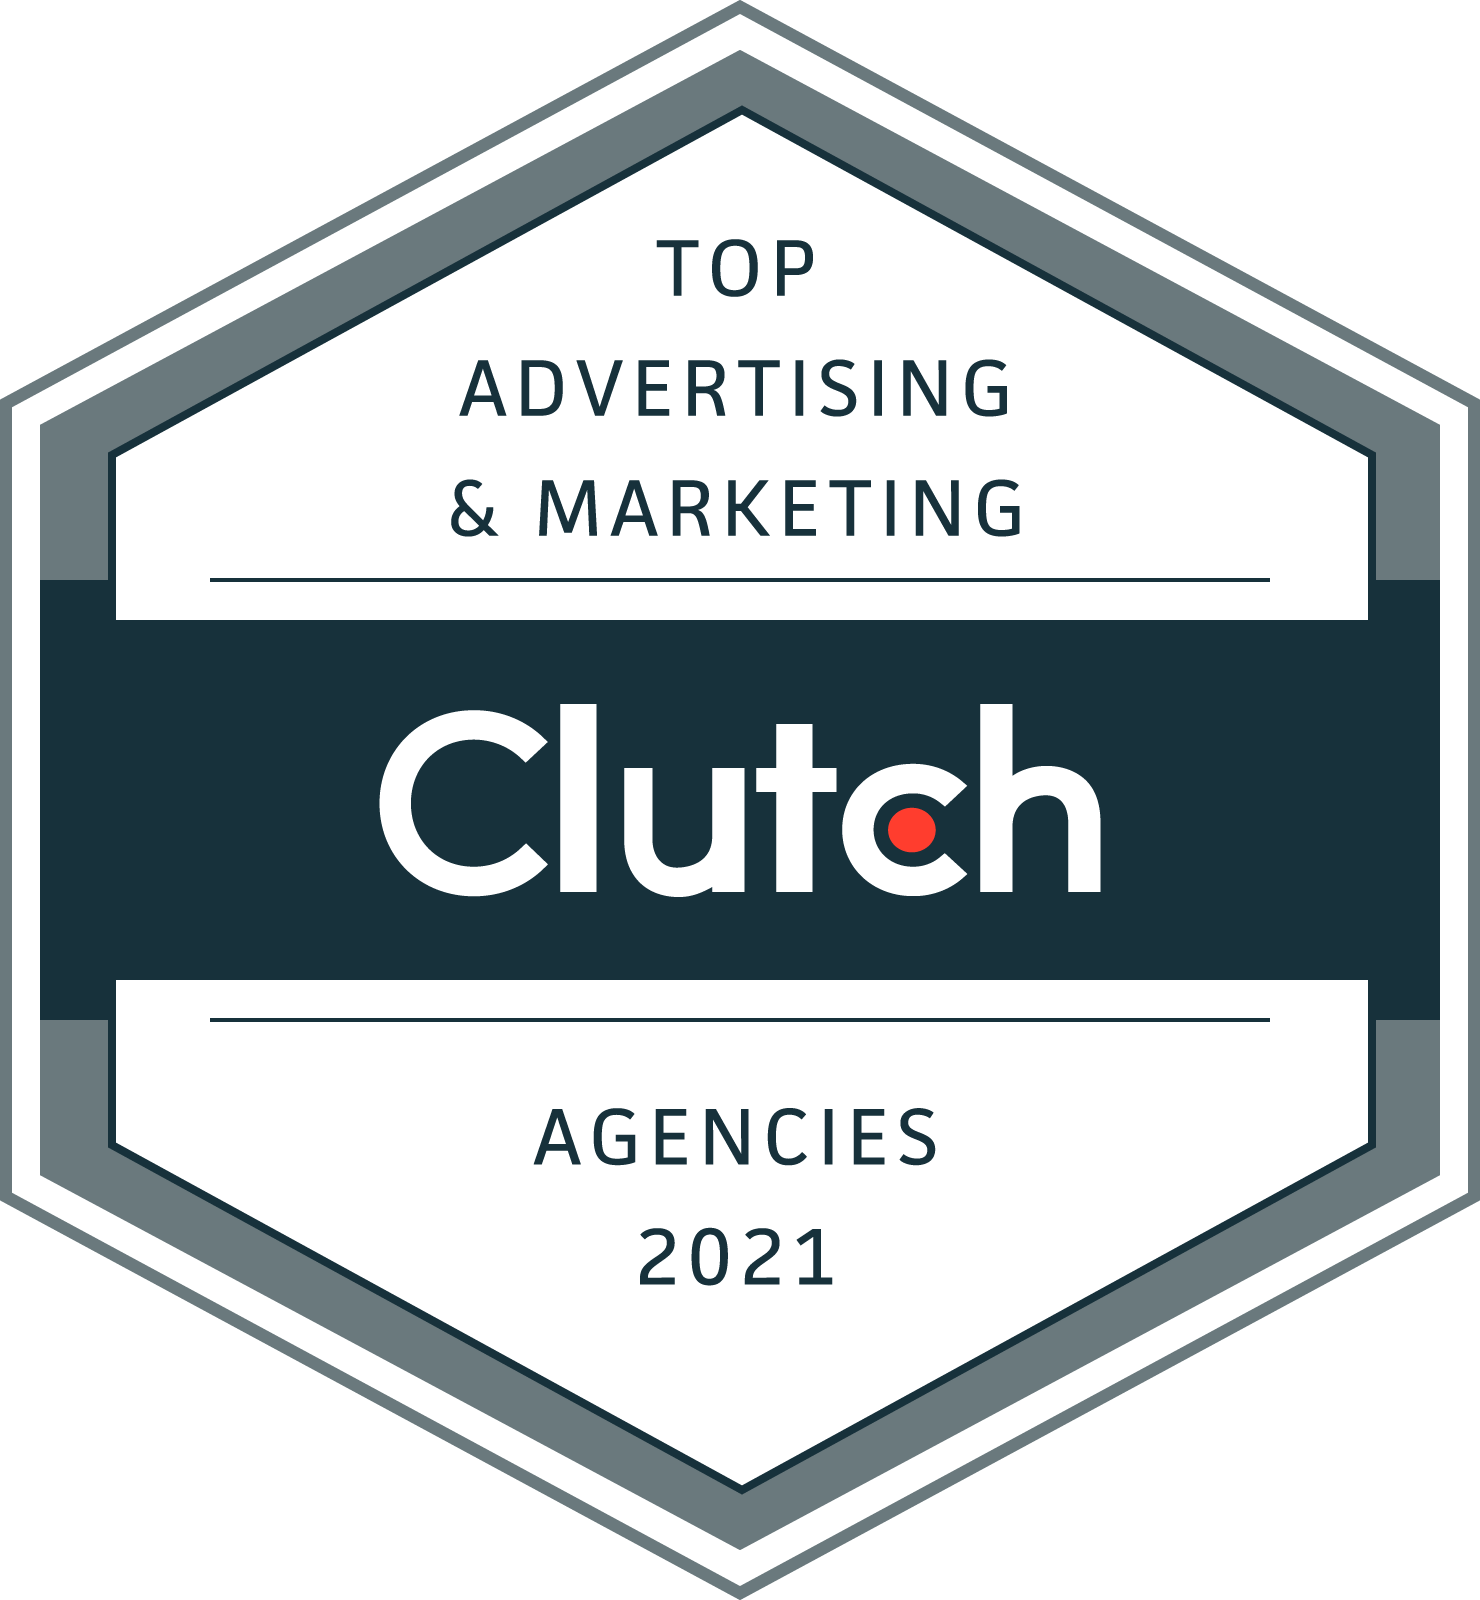 Top Advertising Agency 2021 - Clutch Awards